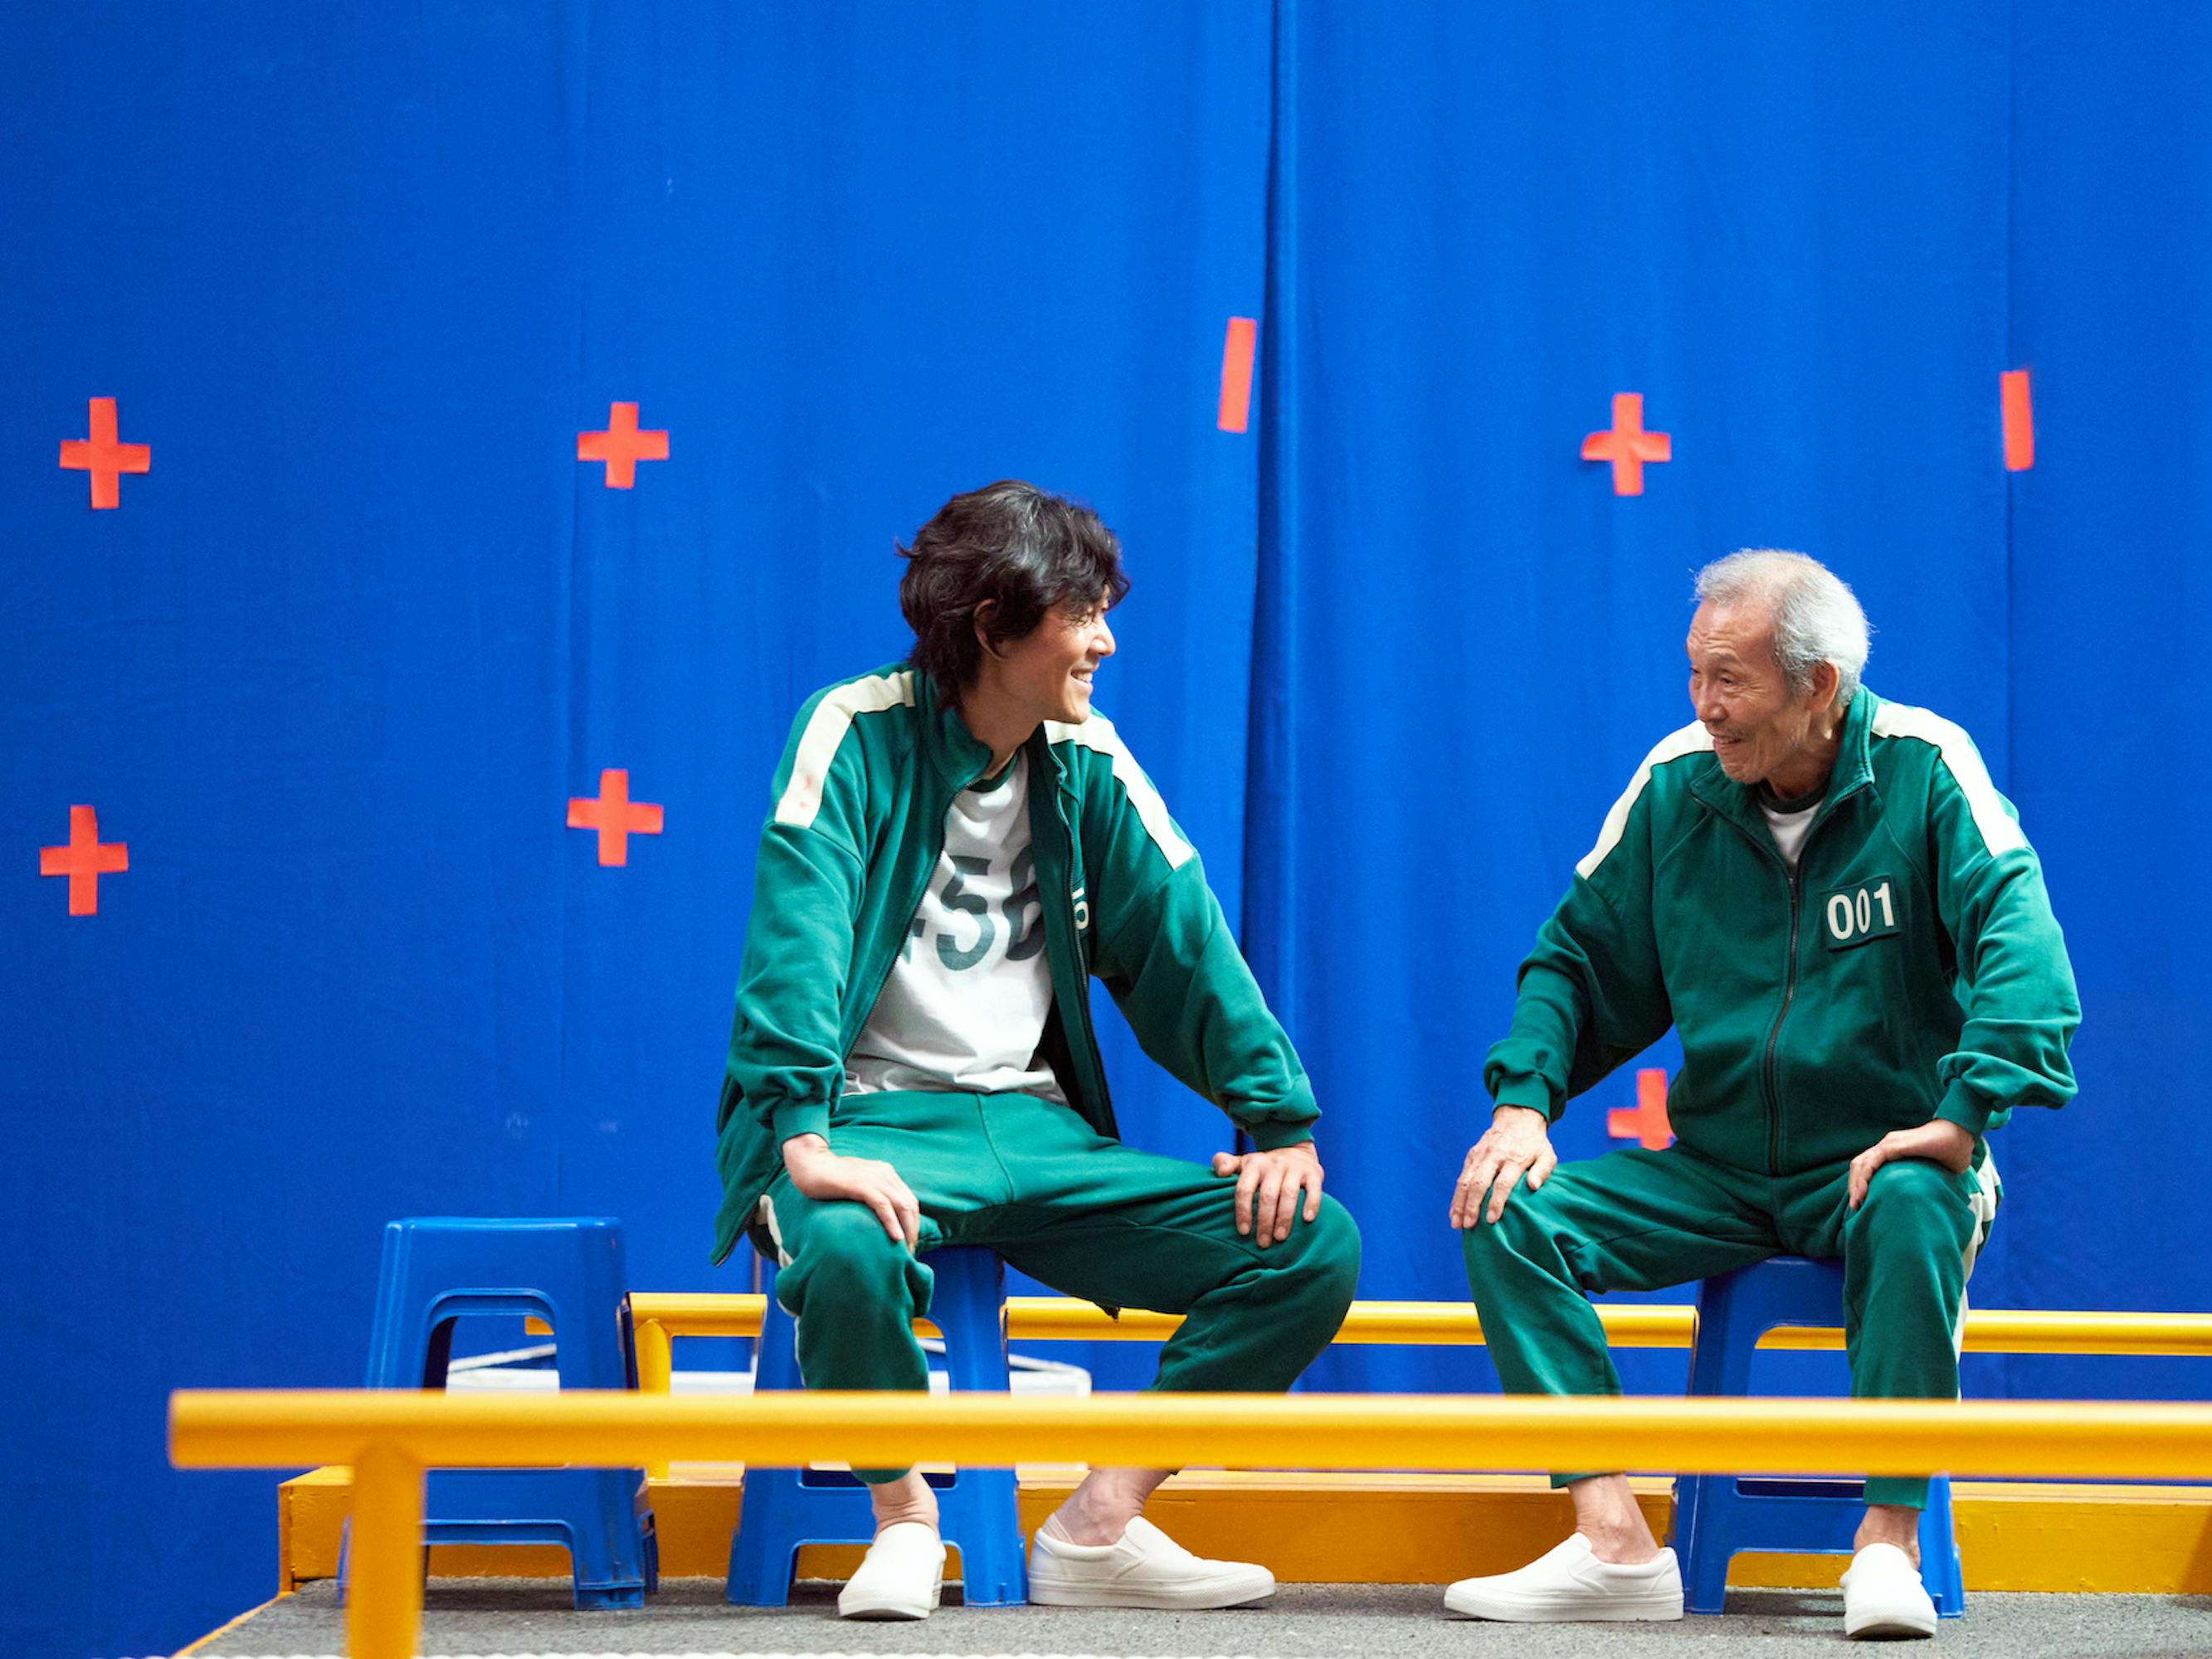 Seong Gi-hun (Lee Jung-jae) and Oh Il-nam (Oh Young-soo) sit on a yellow bench in their green tracksuits.